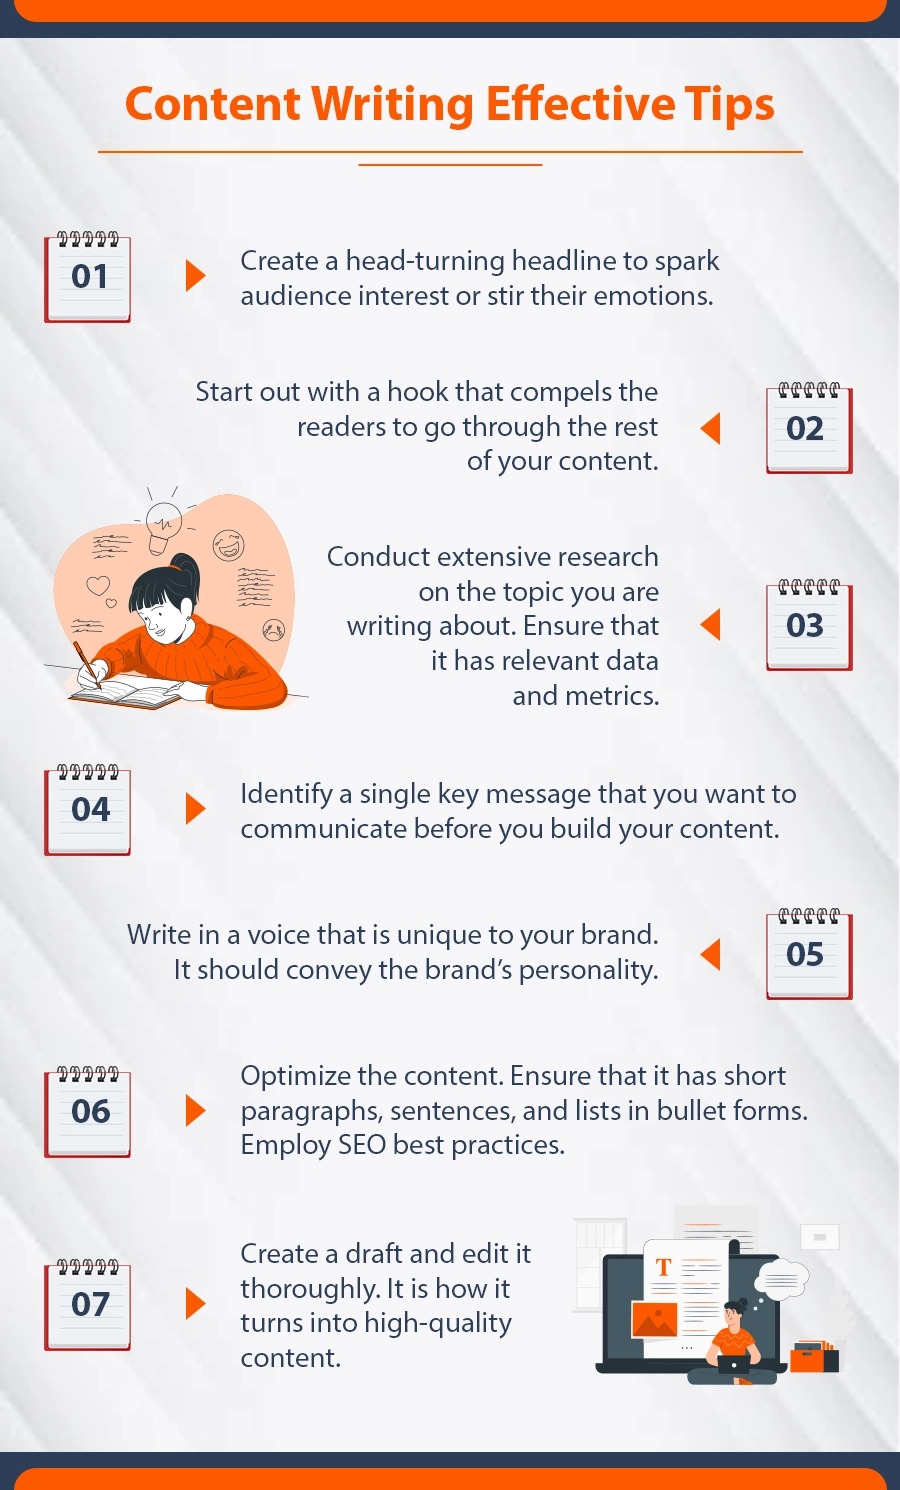 Content Writing Effective Tips